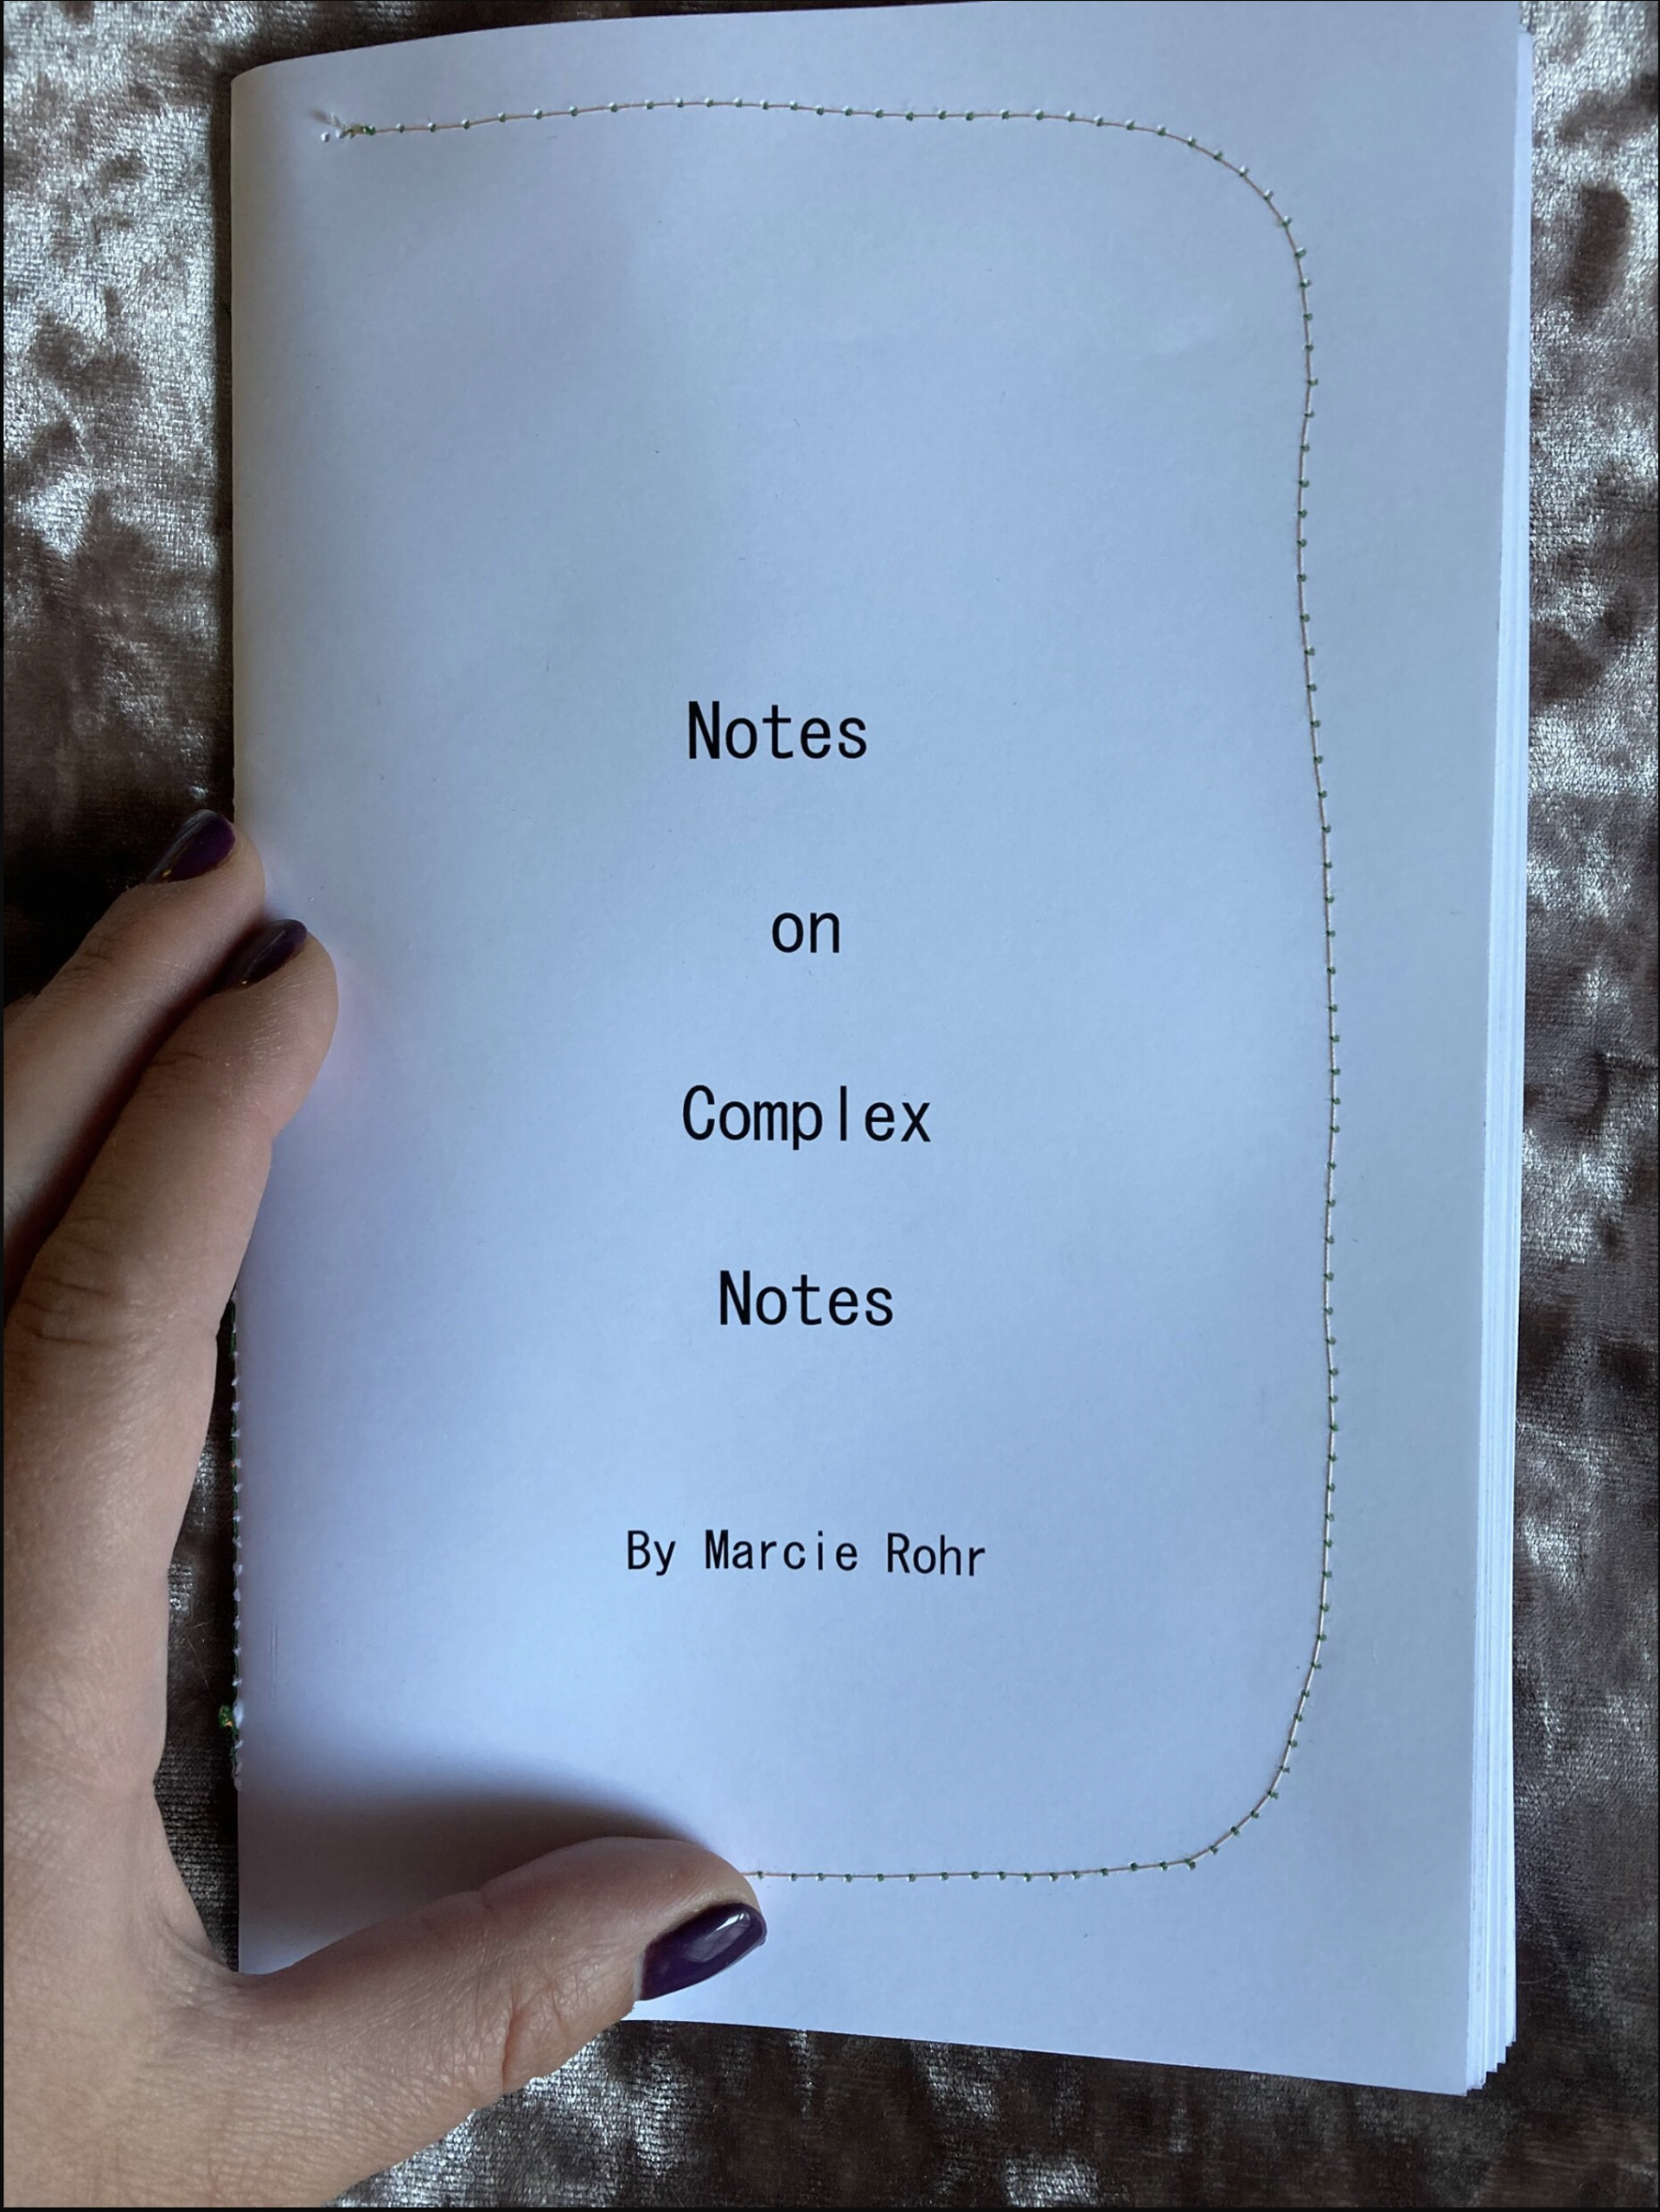 Notes on Complex Notes Book by Marcie Rohr